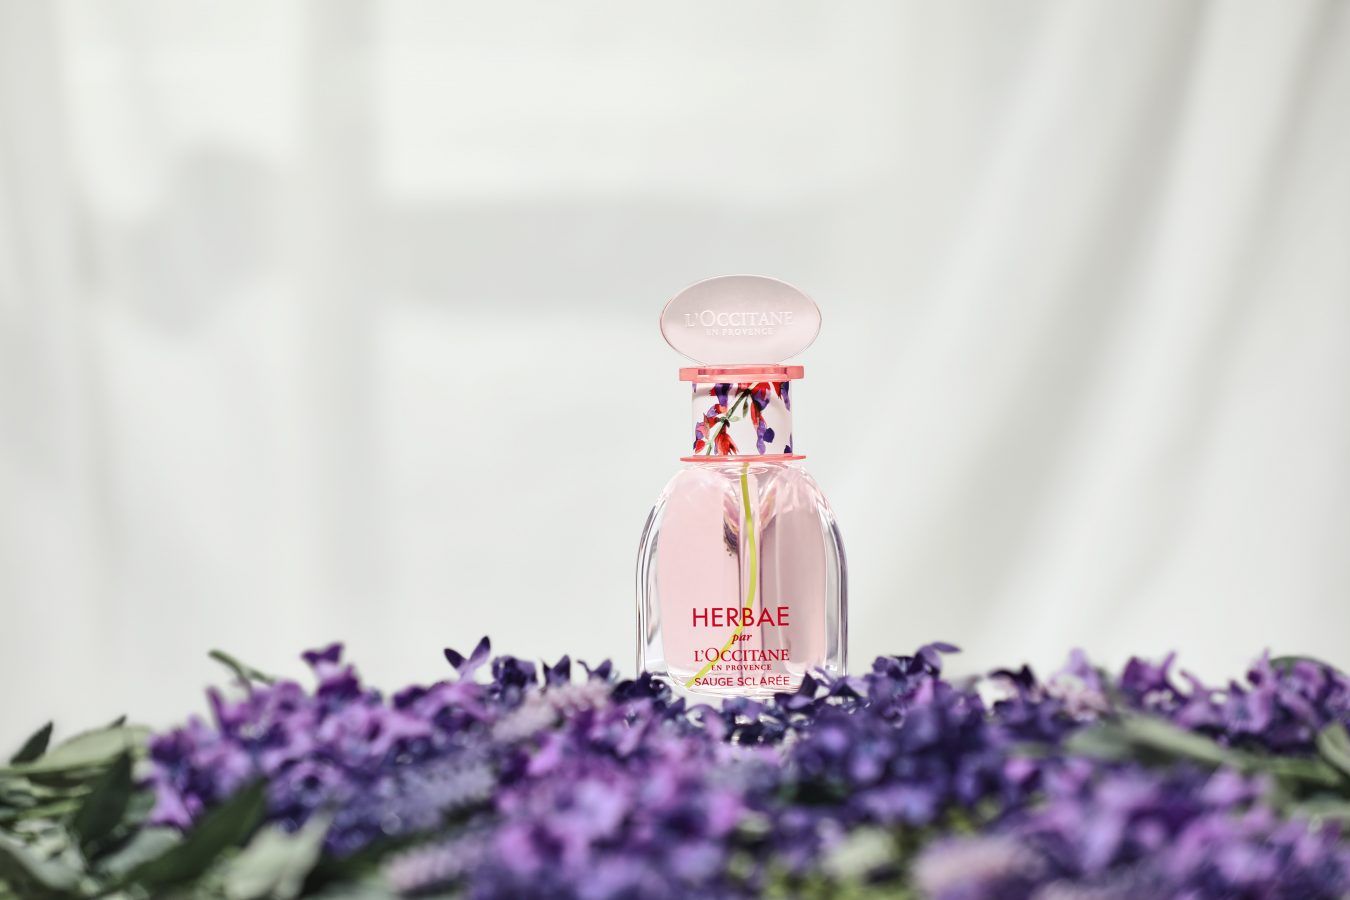 Audacious, Sensual and Mysterious, Herbae Clary Sage from L’Occitane for bold women